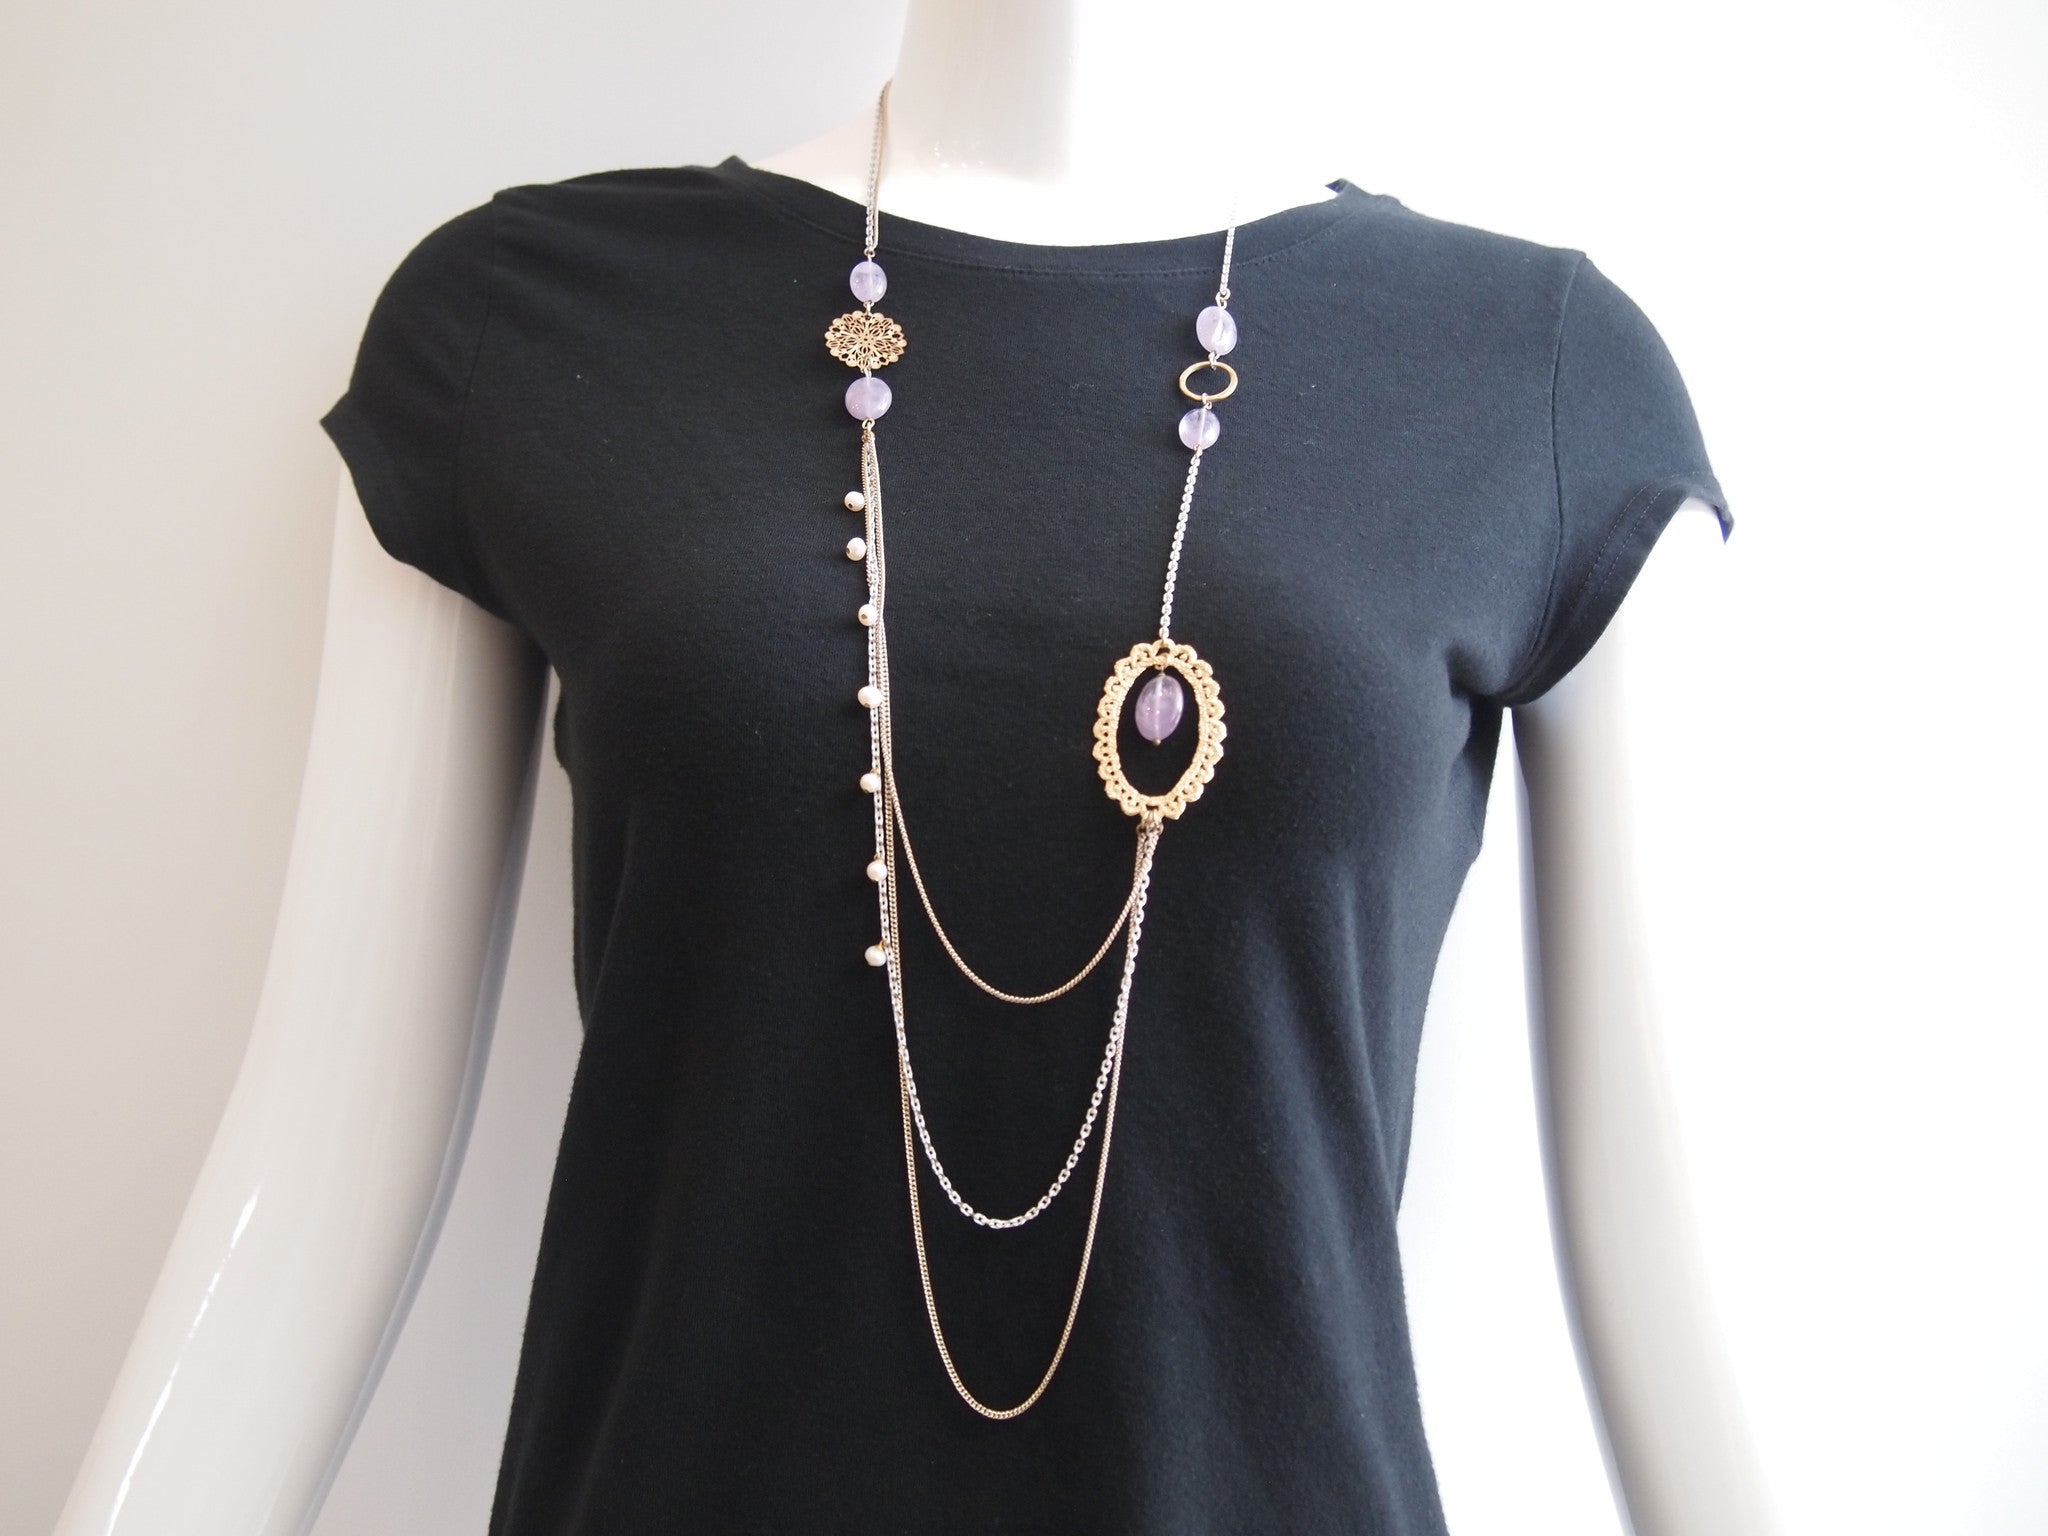 Handmade necklace with purple amethyst & freshwater pearl